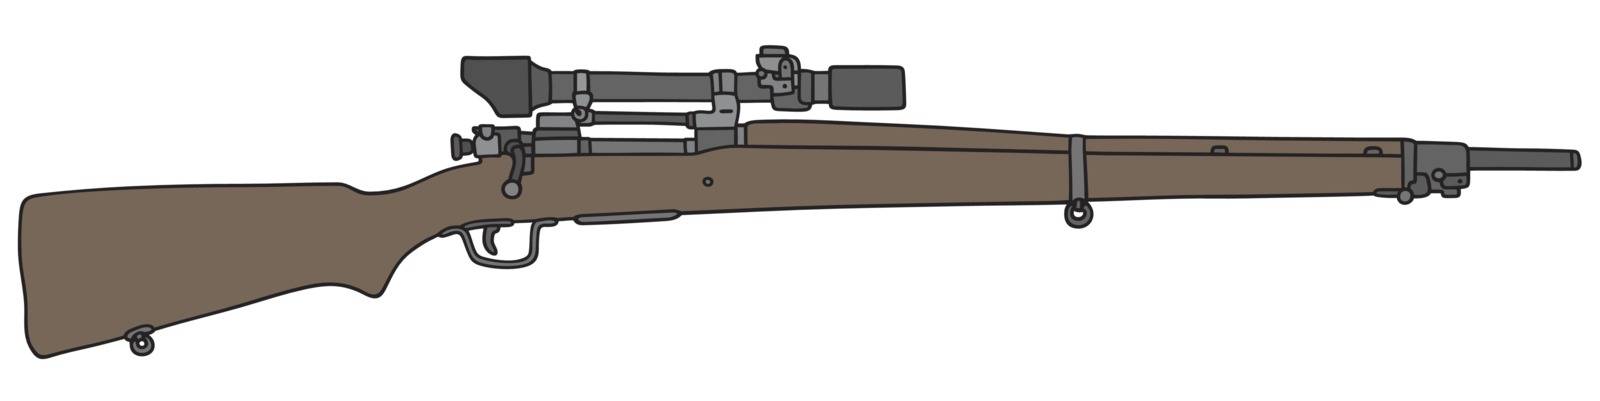 Hand drawing of an old military rifle with a telescope